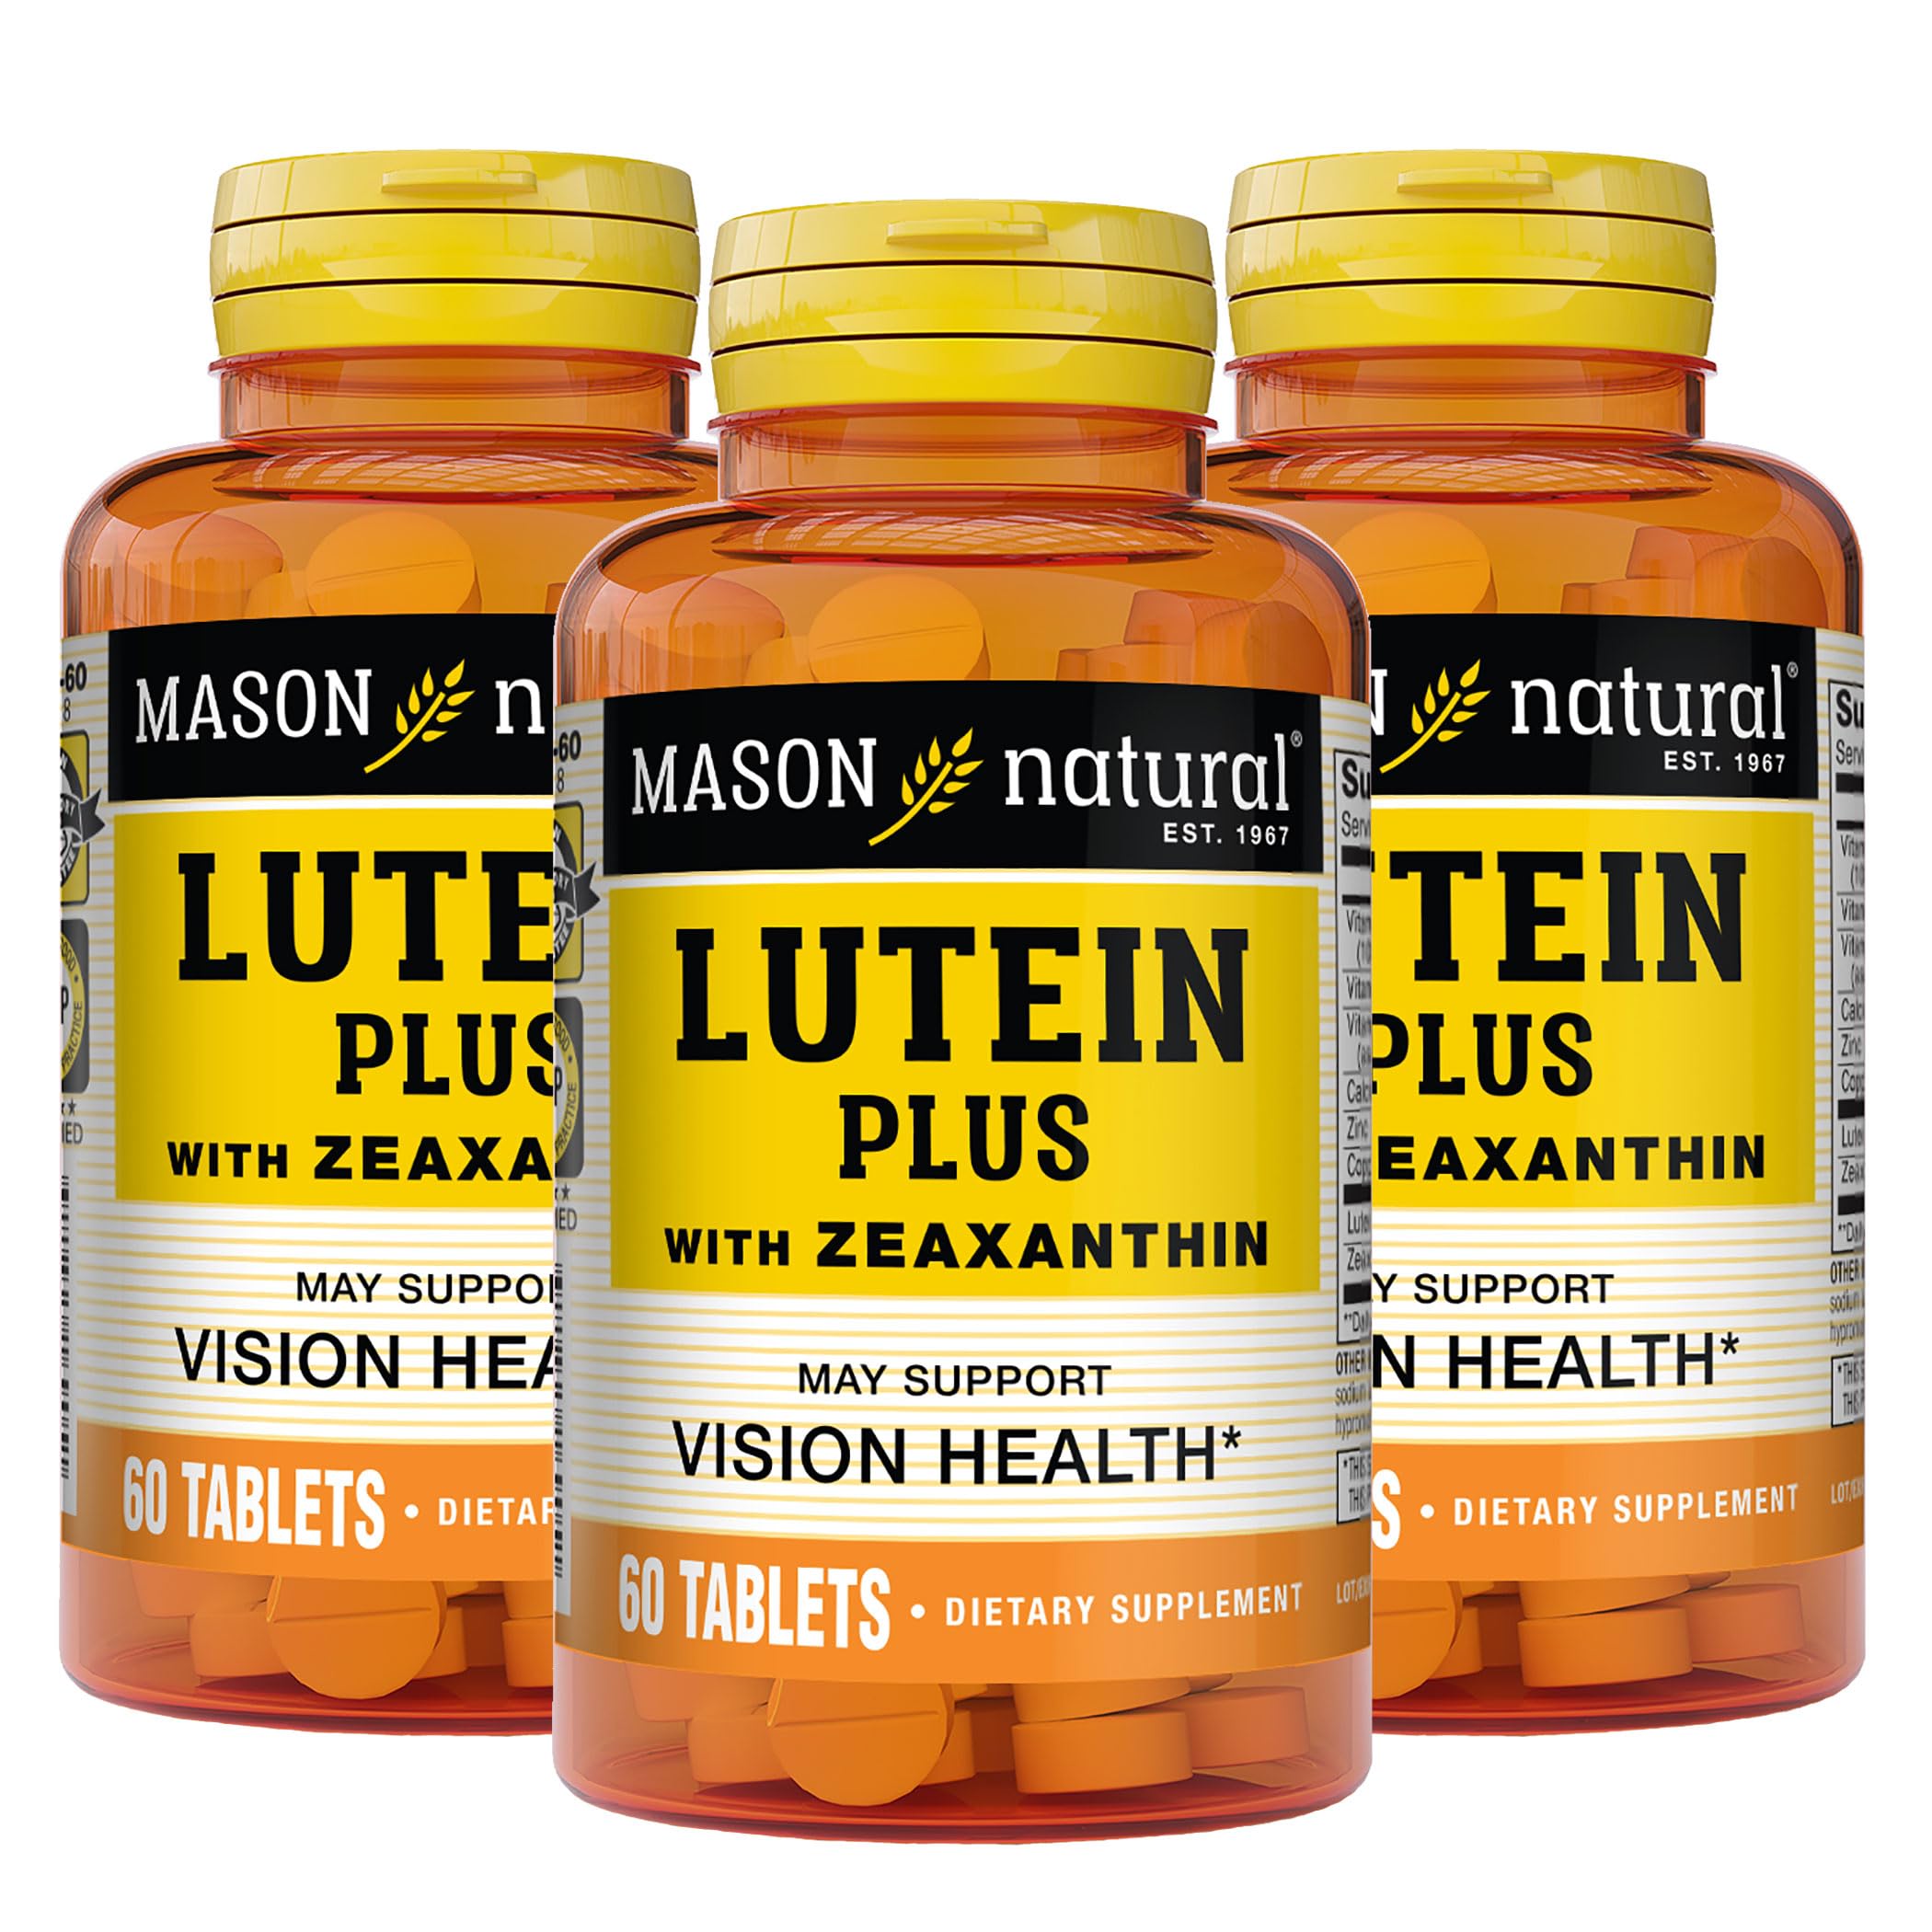 MASON NATURAL Lutein Plus with Zeaxanthin, Vitamins A, C, E, Zinc and Copper - Healthy Vision and Eye Function, Supports Eye Health, 60 Tablets (Pack of 3)